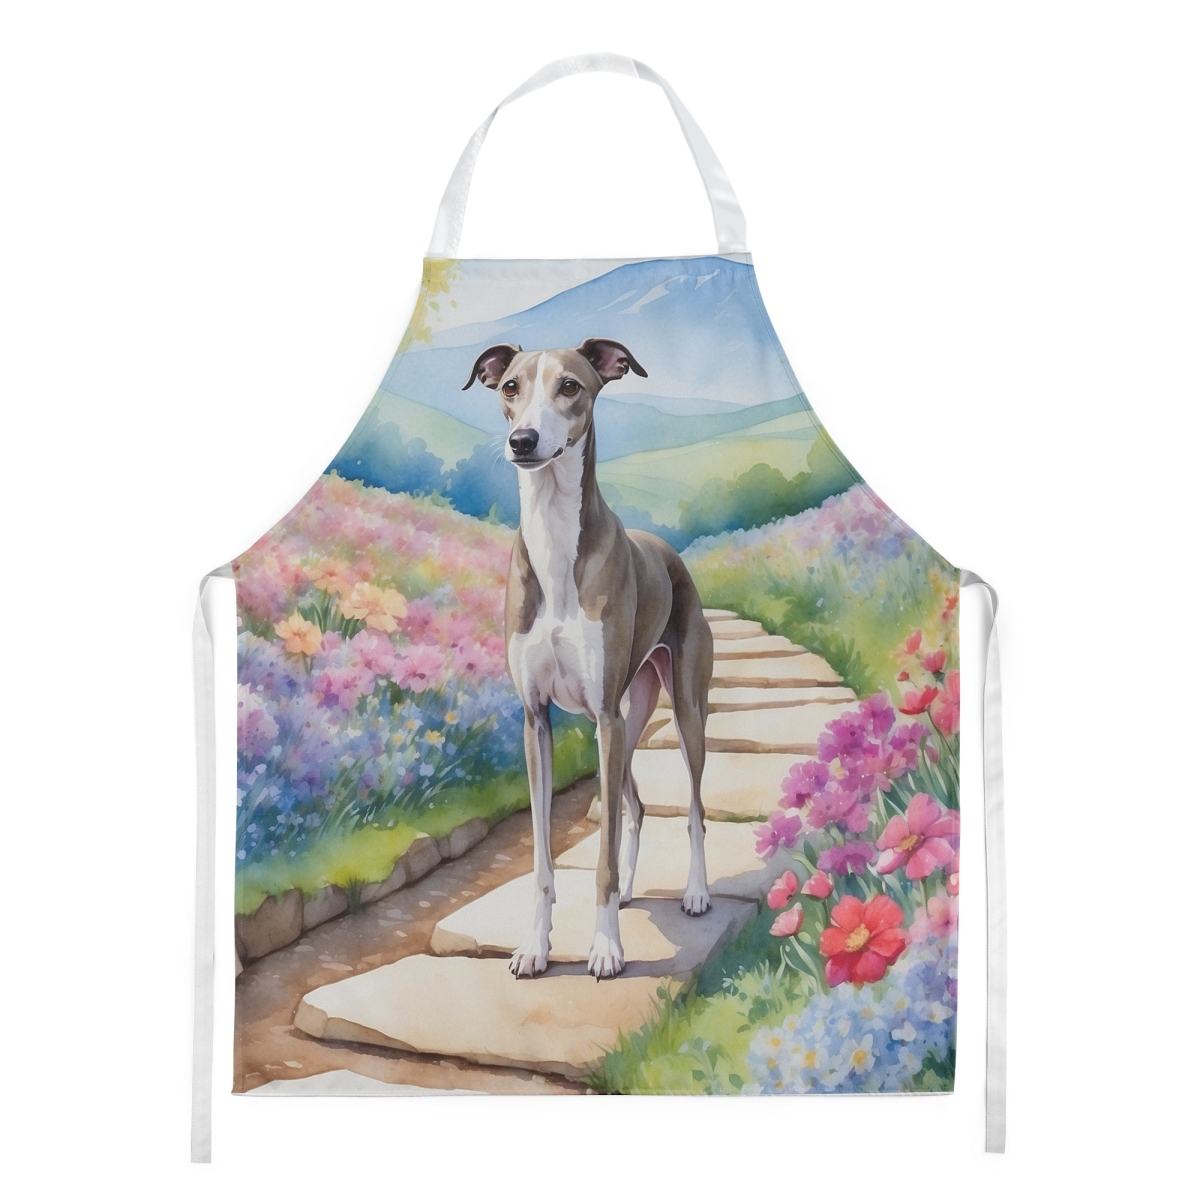 Picture of Carolines Treasures DAC6733APRON 30 x 27 in. Whippet Spring Path Apron